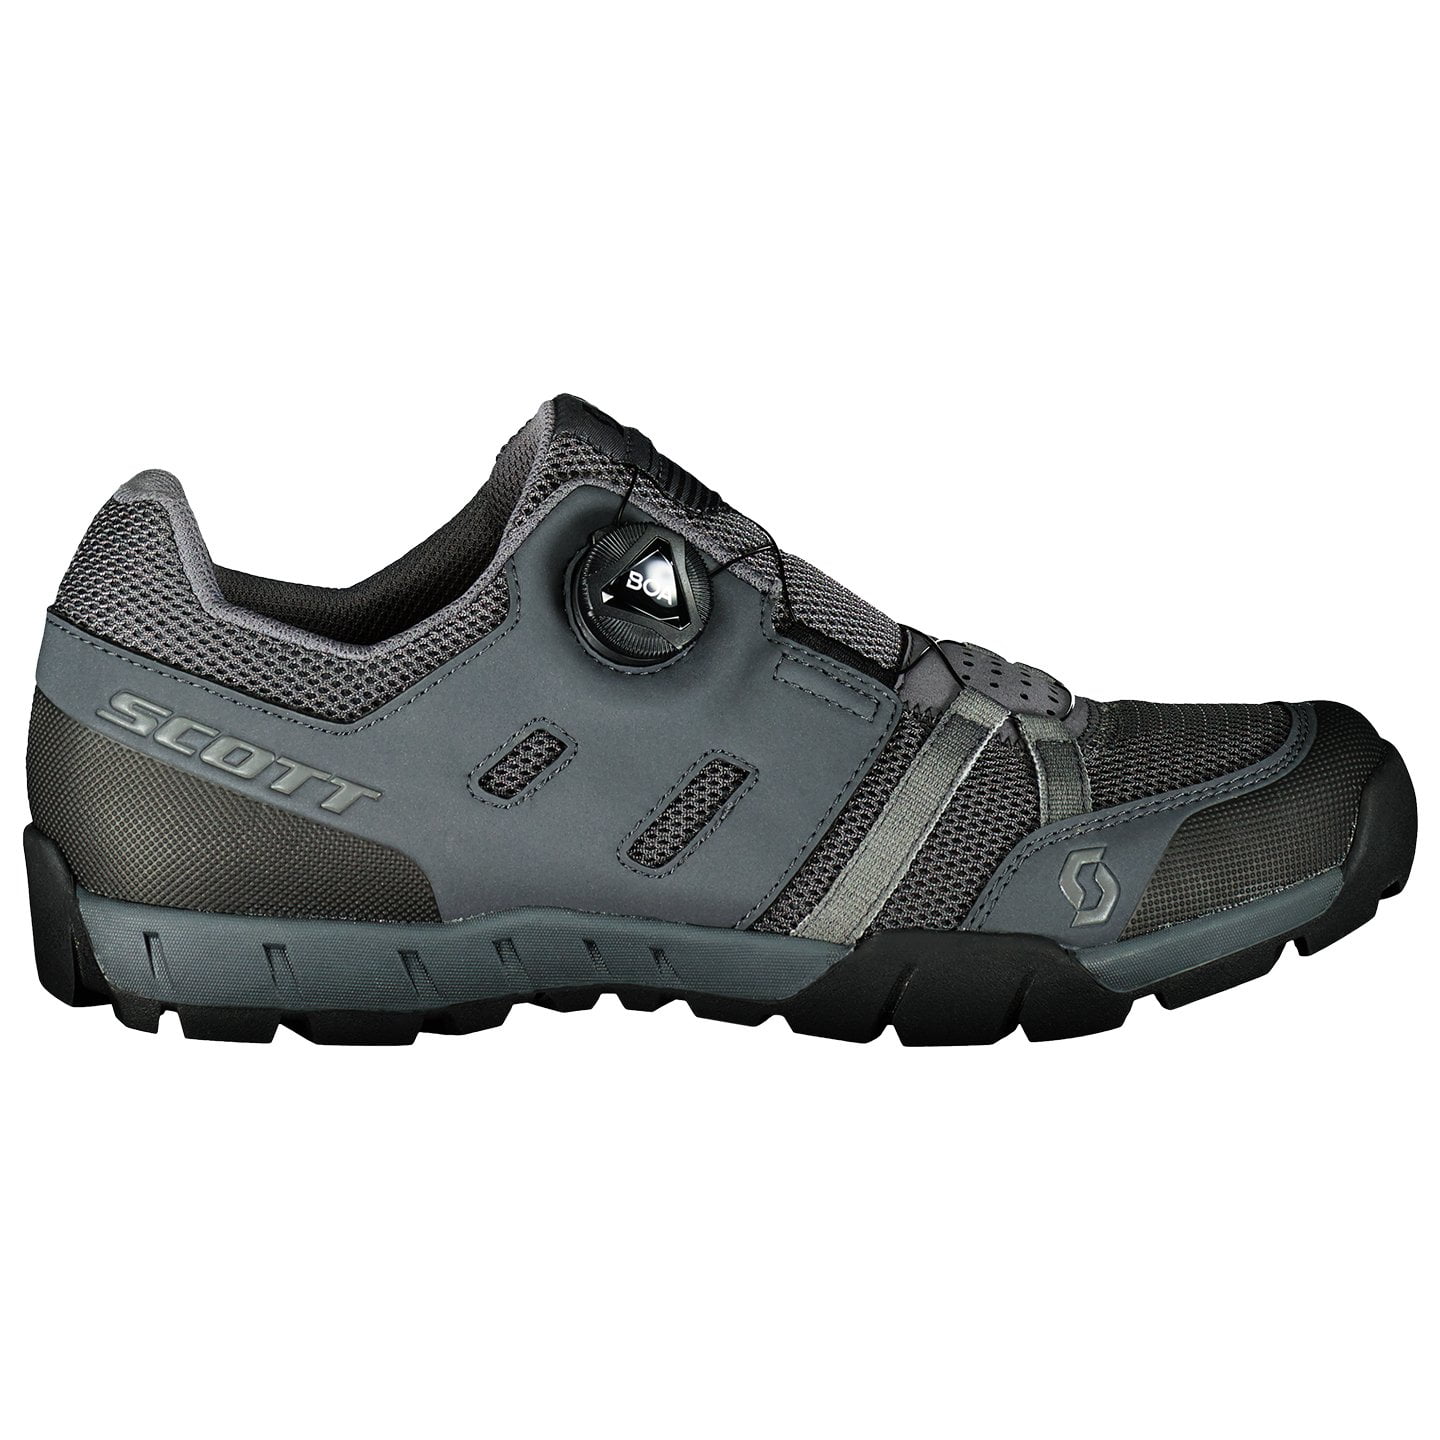 Sport Crus-R Boa 2024 MTB Shoes MTB Shoes, for men, size 46, Cycling shoes